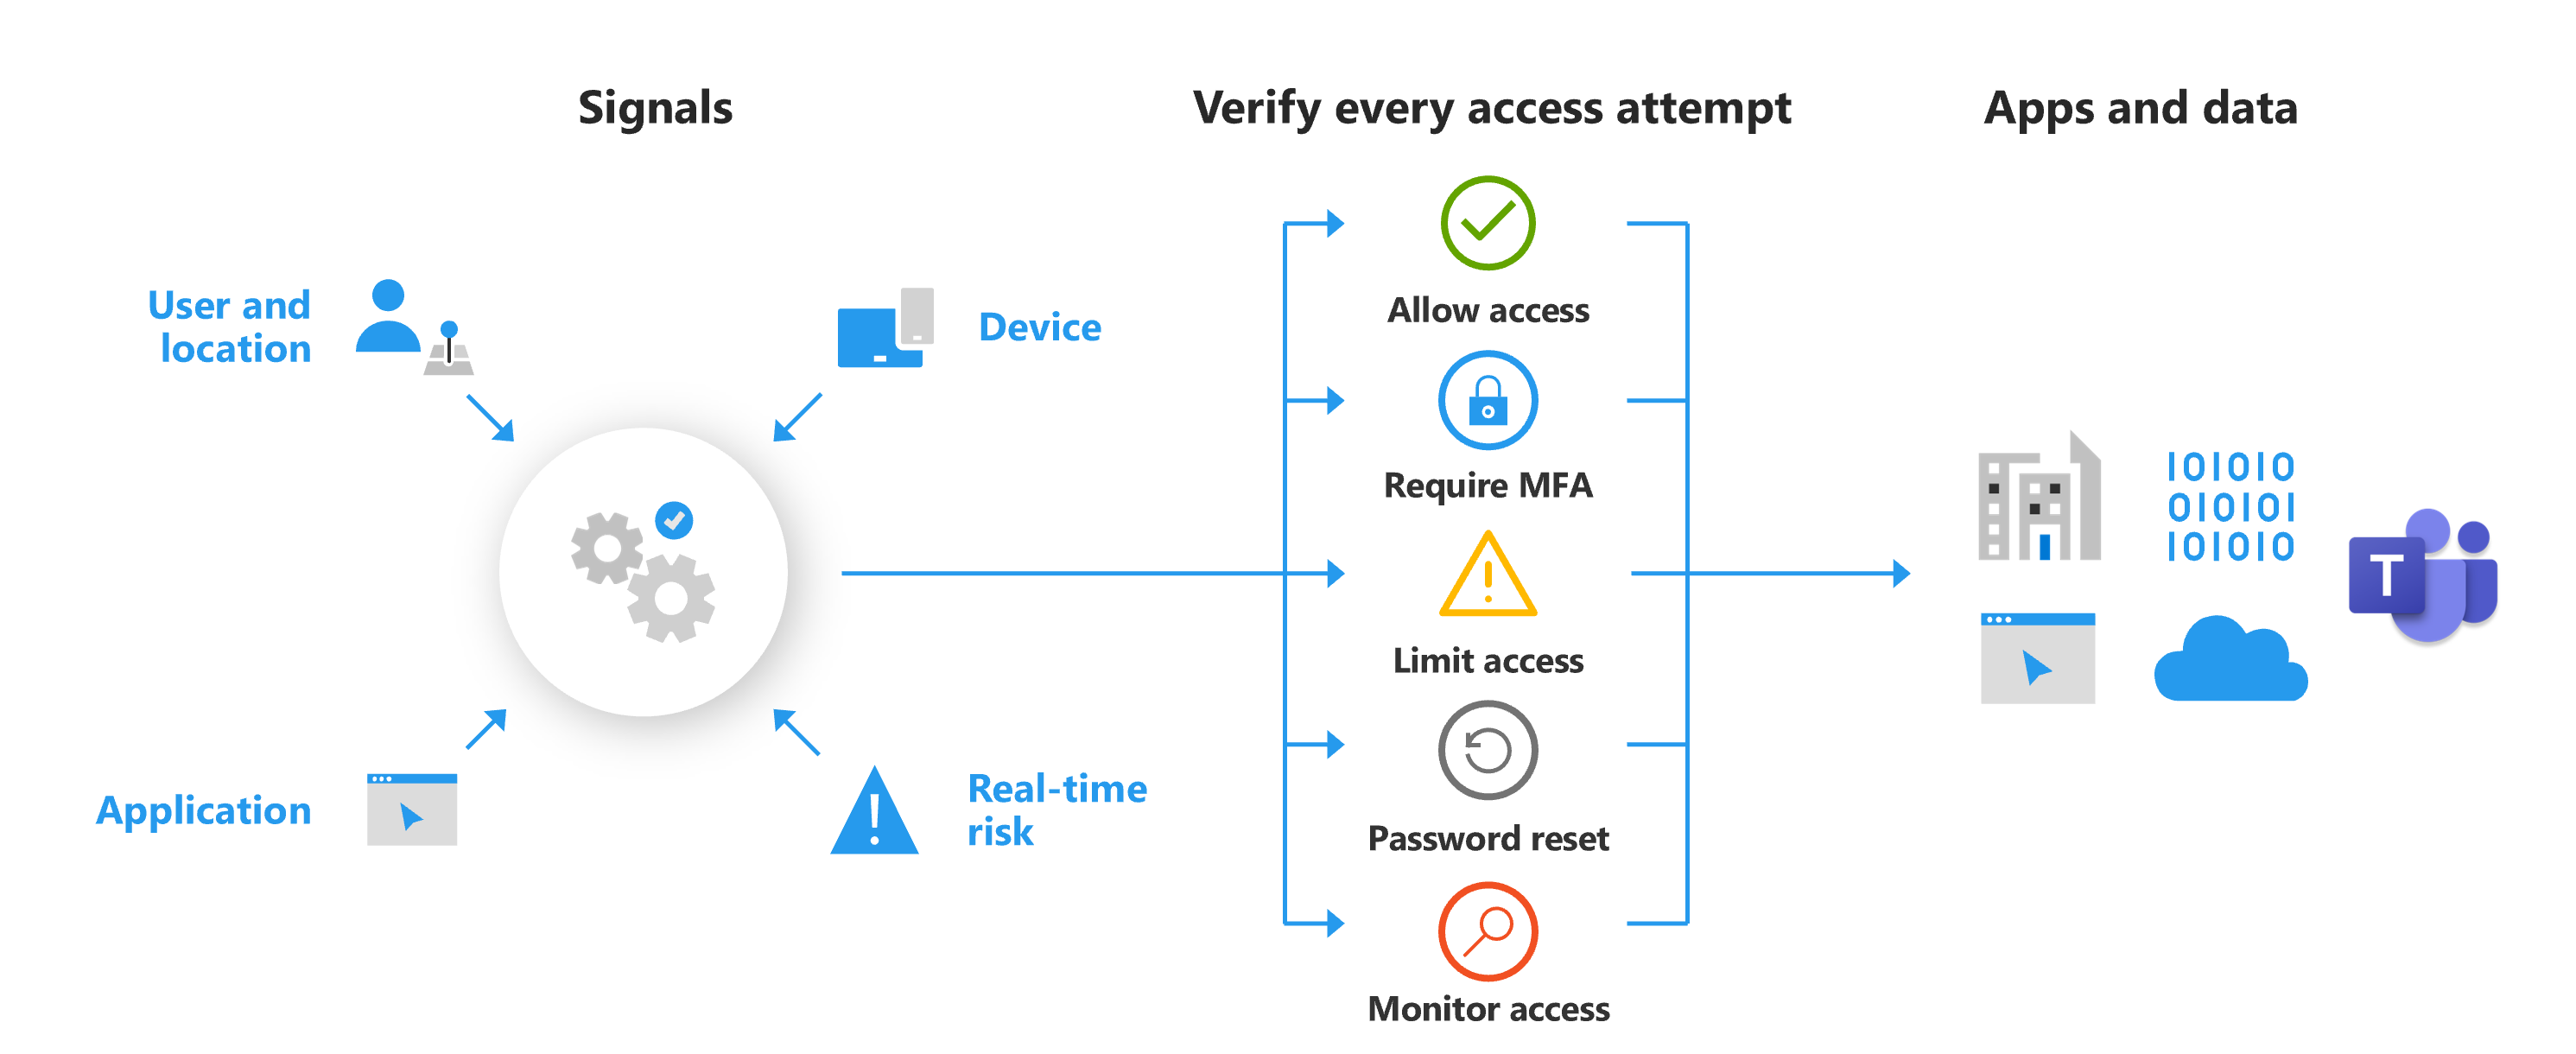 Diagram that shows the capabilities of conditional access policy, including allow access, require M F A, limit access, password reset, and monitor access.